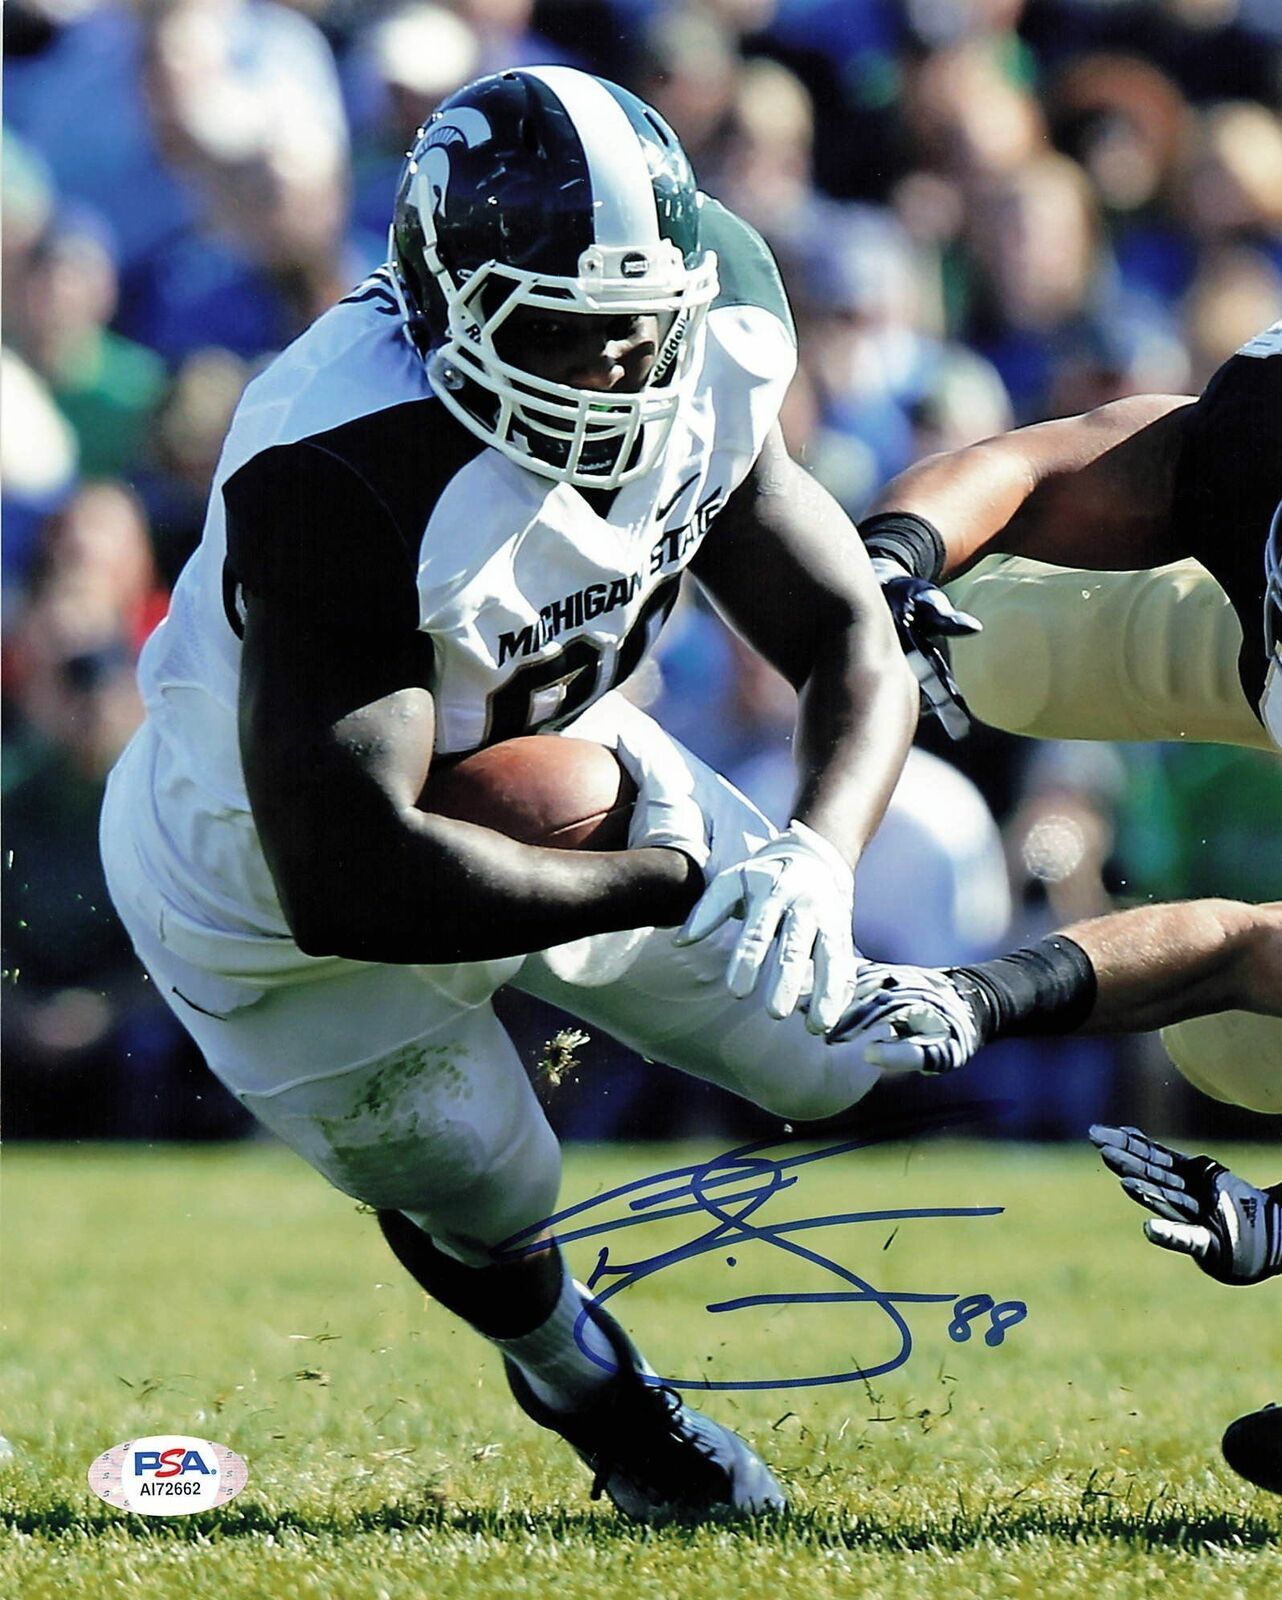 Primary image for Dion Sims Signed 8x10 photo PSA/DNA Michigan State Spartan Autographed